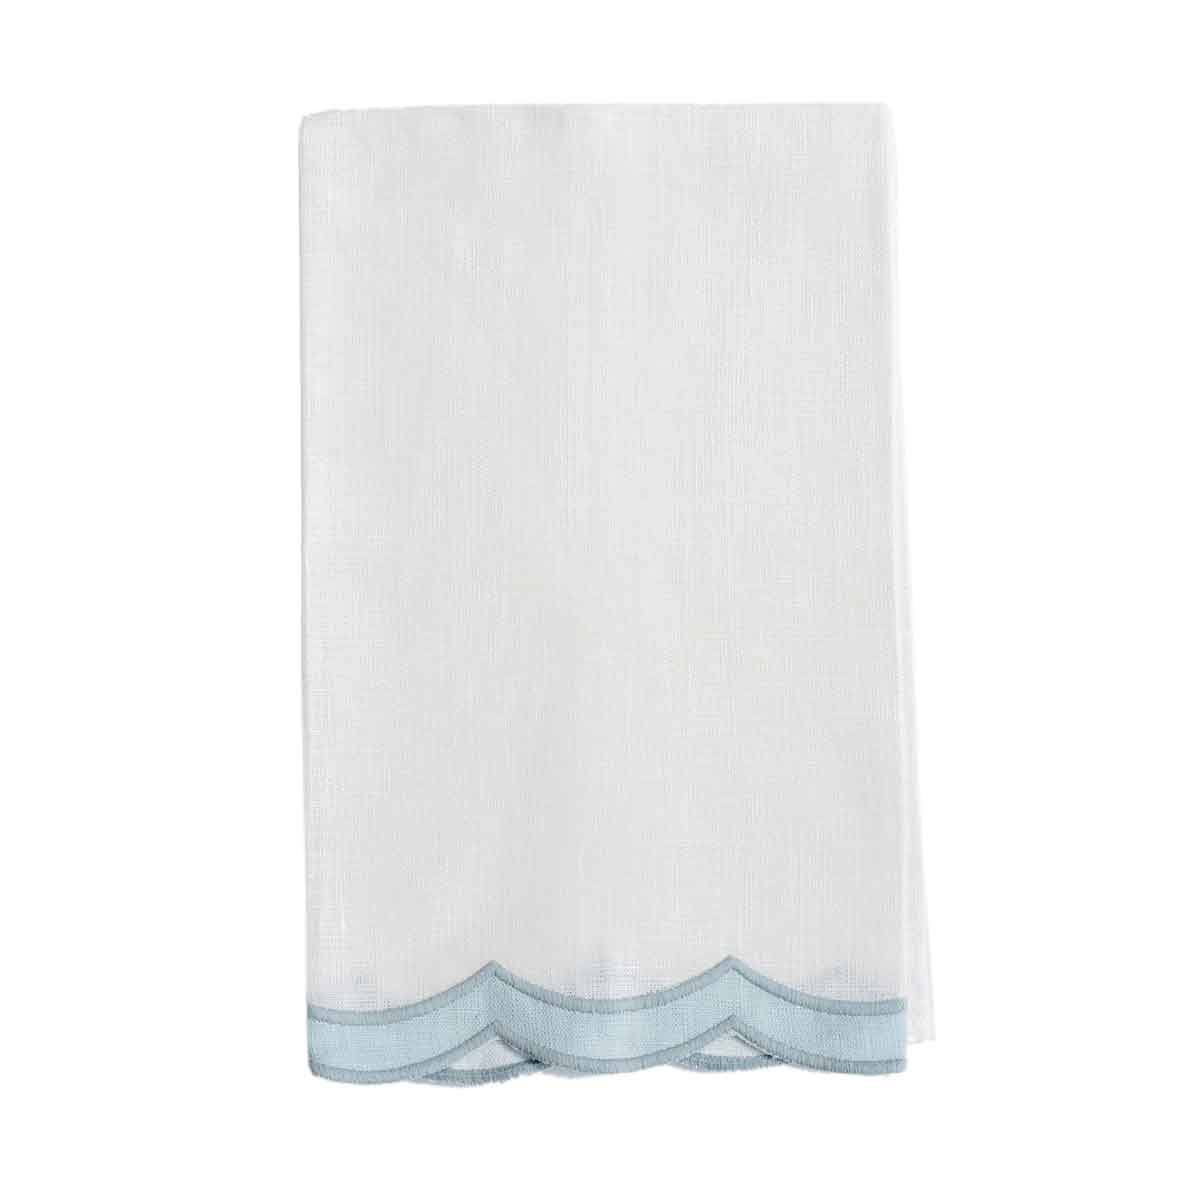 Double Happiness Guest Towel | Garden Folly Fine Linens - linen like hand towels, blank embroidery hand towels, guest hand towels linen